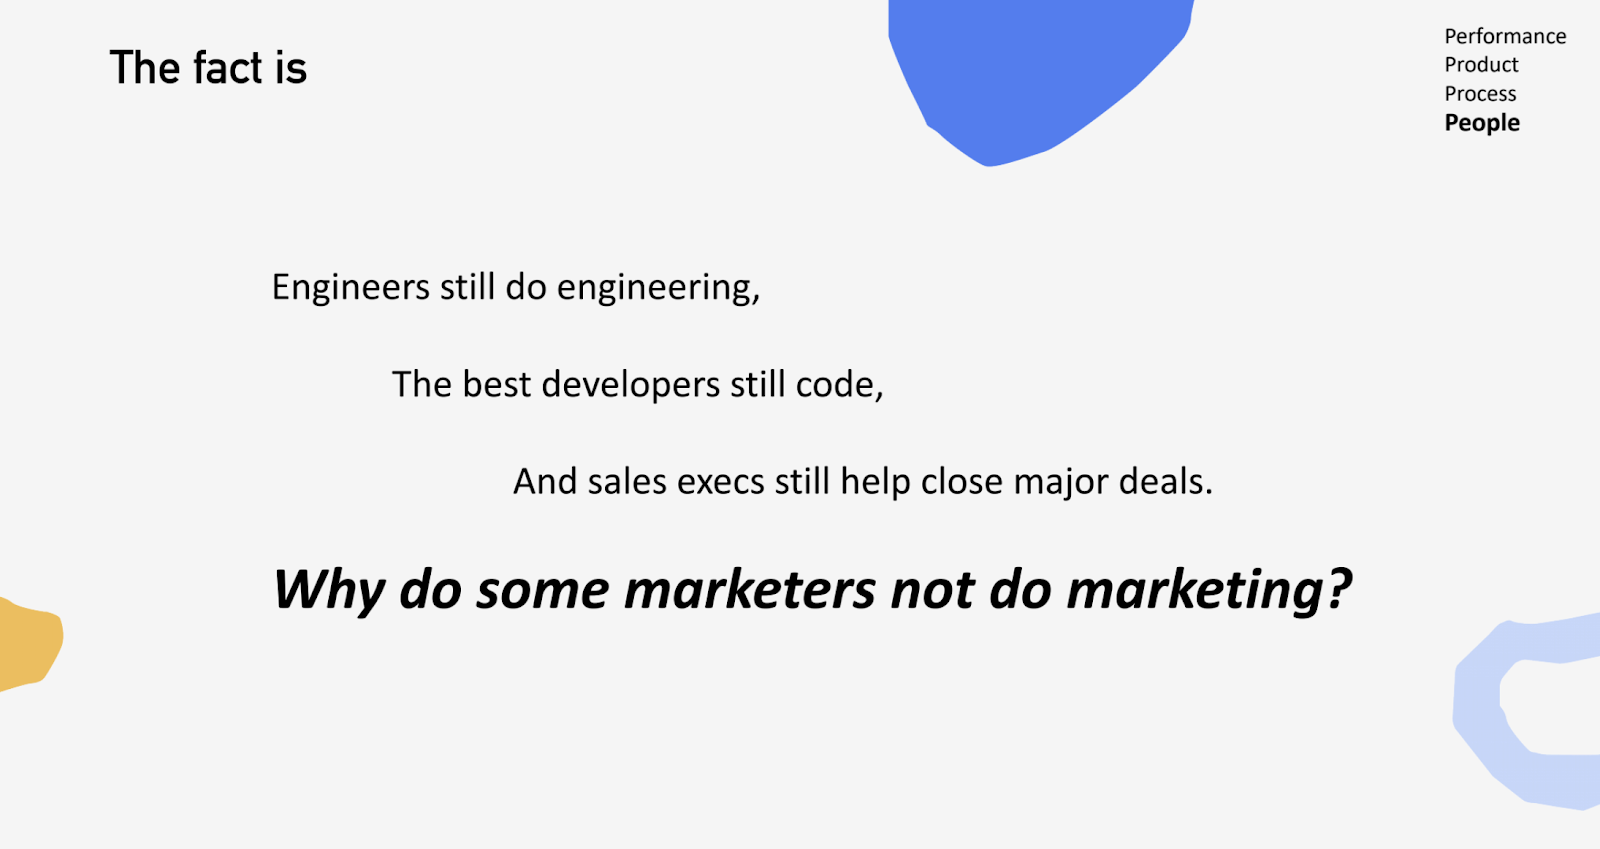 If engineers do engineering, developers still code, sales execs close deals, why do marketers not do marketing?